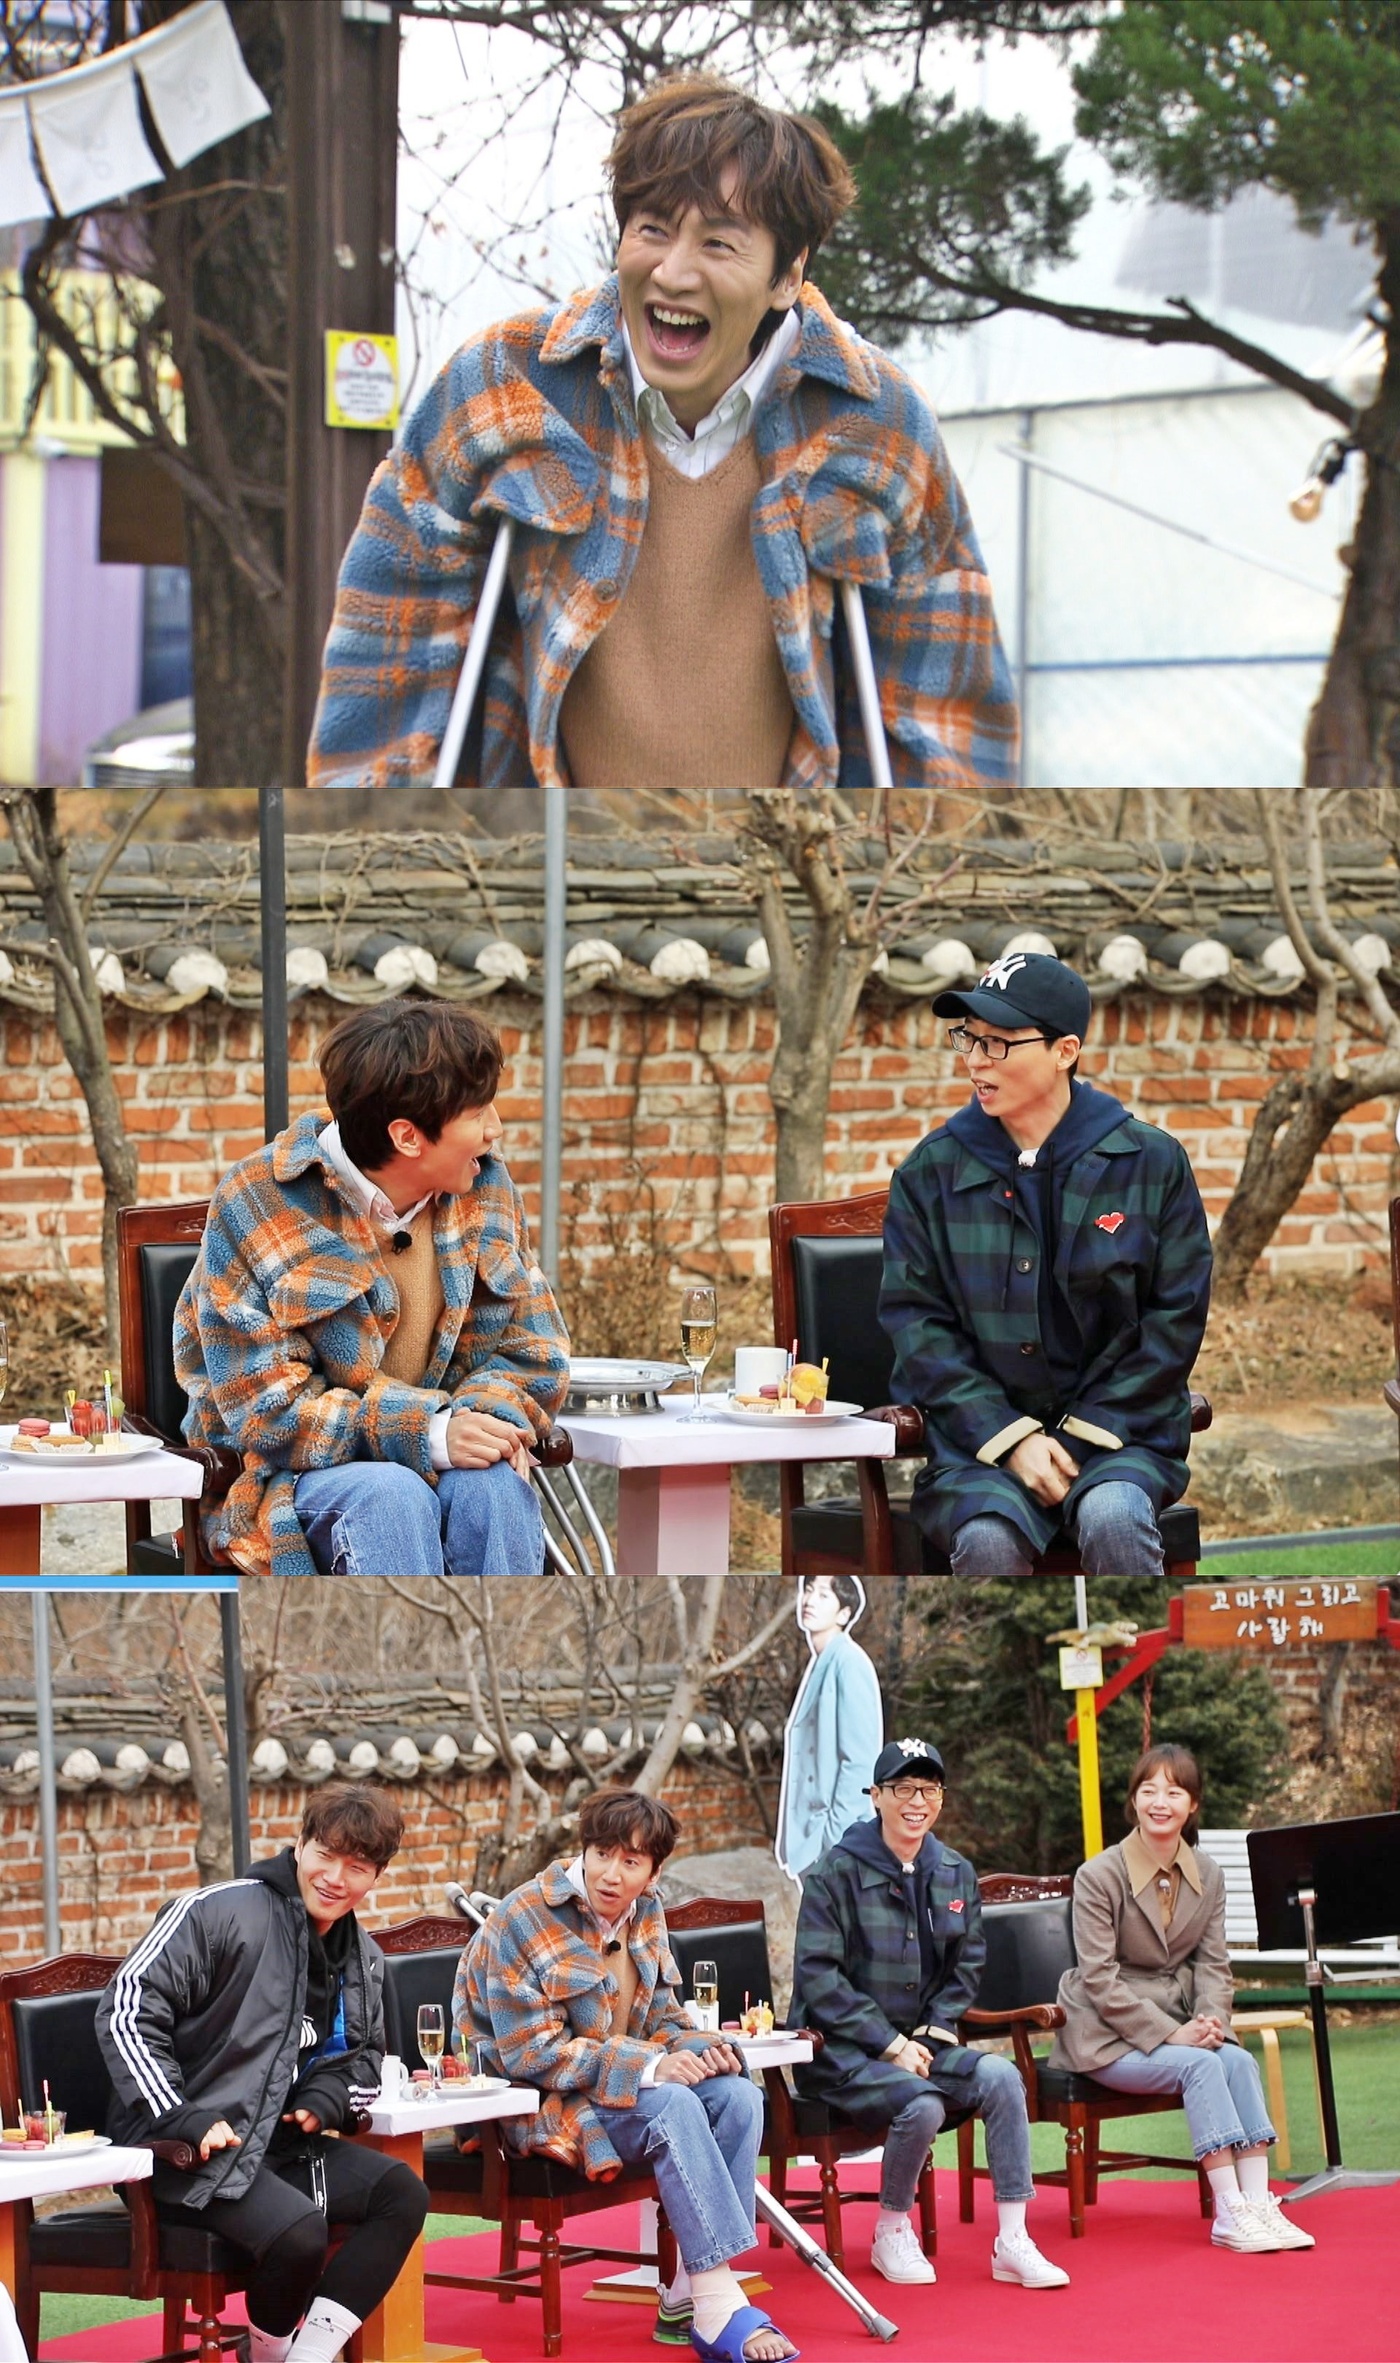 Seoul = = Actor Lee Kwang-soo will make a comeback on SBS Running Man.Lee Kwang-soo has stabilized for the past two weeks due to leg injuries caused by Acident, but surprised the members by returning to the recent Running Man recording opening.In his unexpected appearance, the members welcomed Lee Kwang-soo with welcome.Lee Kwang-soo said, I wanted to come to the filming place too much, and said, Thank you for worrying and waiting.Lee Kwang-soo has been a big player in the following missions and races as well as returning in two weeks.On this day, Actor Lee Il-hwa, Hwang Young-hee, Gag Woman Park Mi-sun and her child guest, who played the impressive role of Mom in the work, and Kang Daniel appeared as Family Race of mother and children. Lee Kwang-soo played the role of Hidden Key I got it.Lee Kwang-soo also expressed his unusual affection for Running Man, saying, I think I will live now and I feel like I have returned to Running Man during the mission.It airs at 5 p.m. on the 22nd.